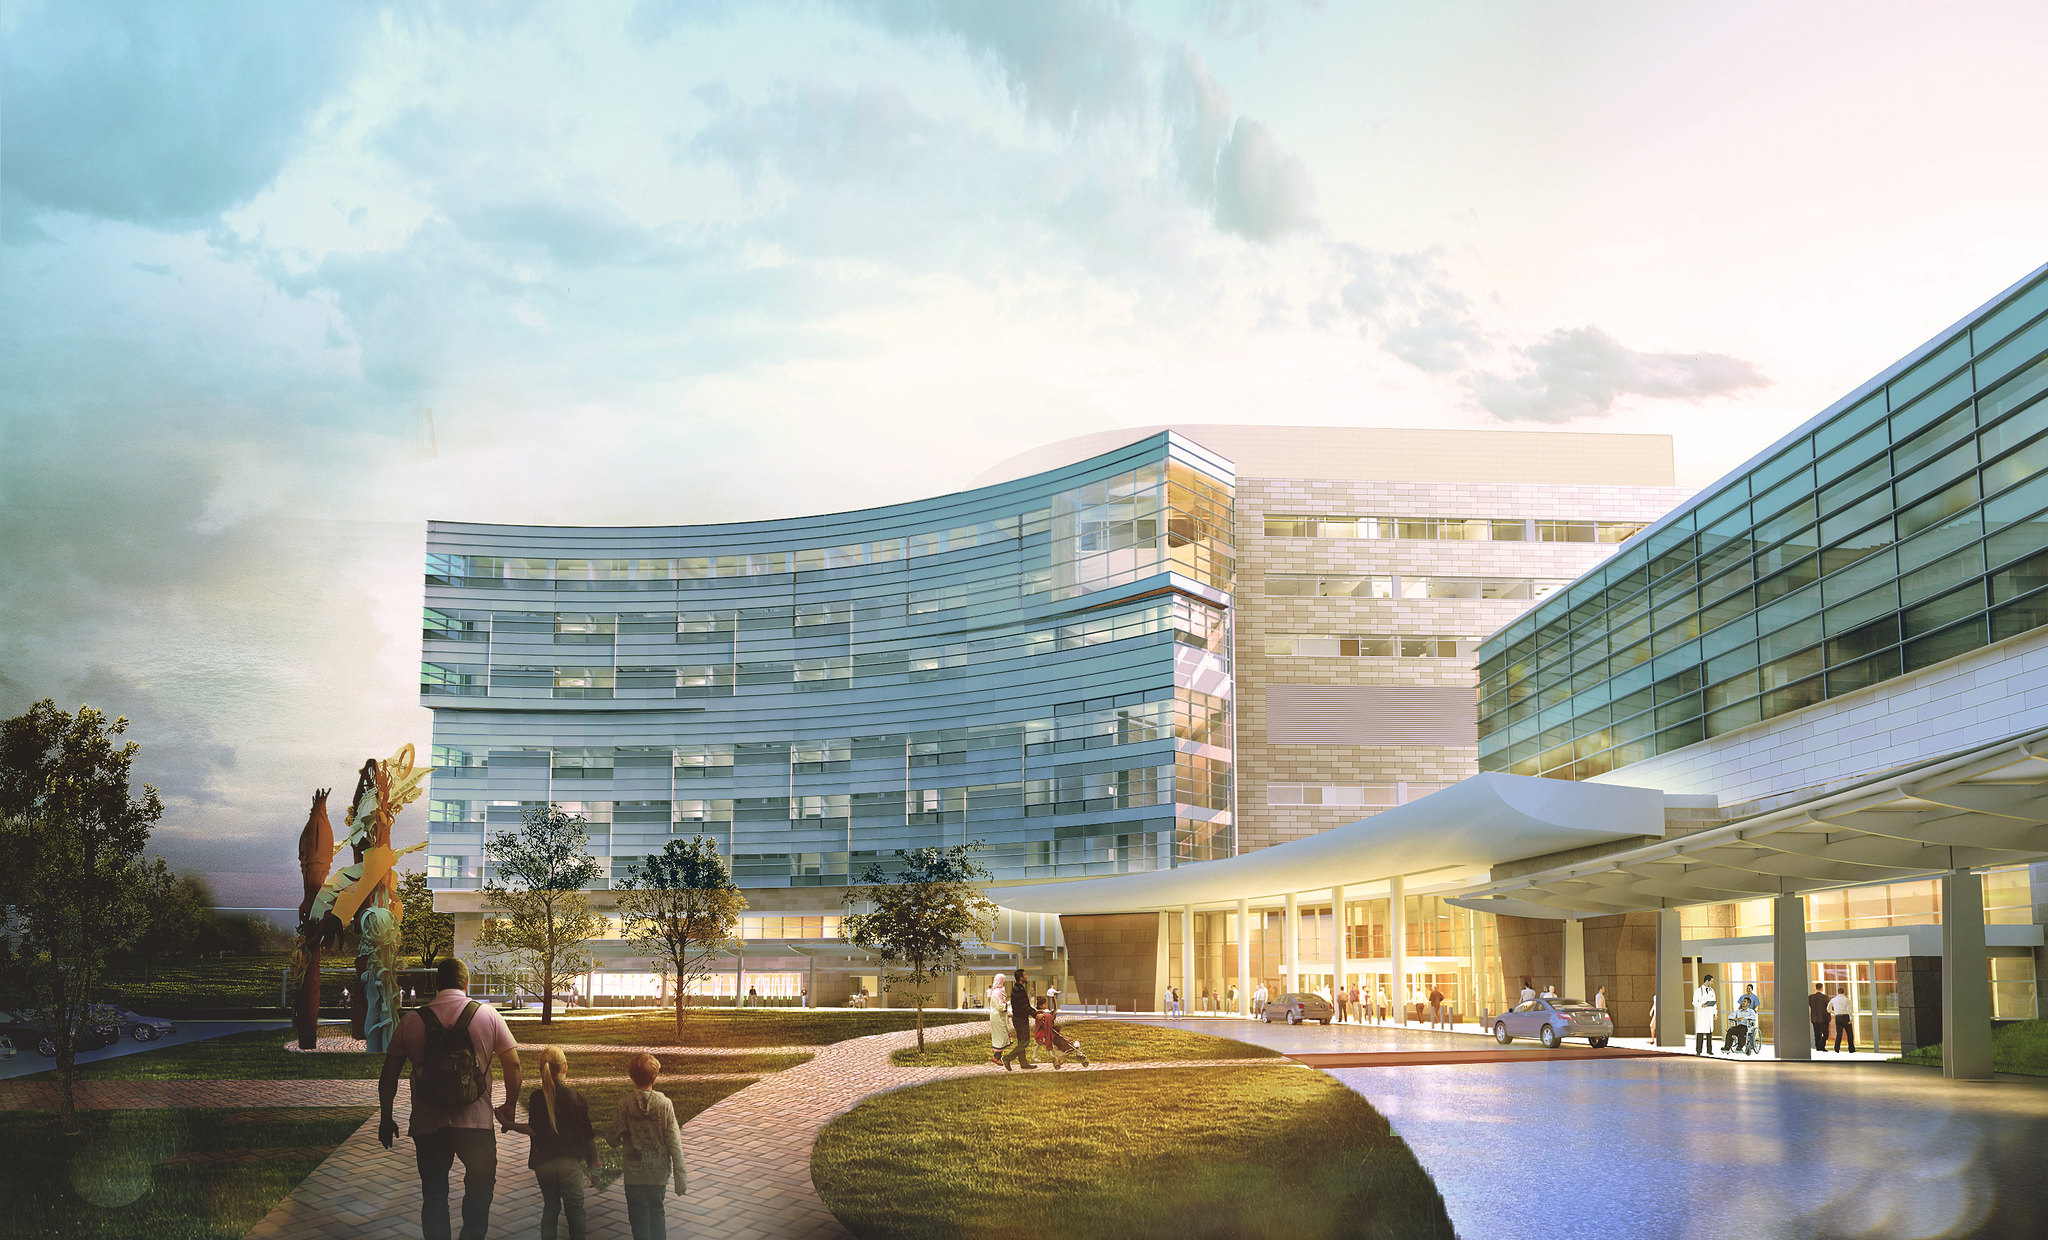 A drawing shows what Penn State Health Children's Hospital will look like when its expansion is complete – a brick and steel building with crescent shape in front.